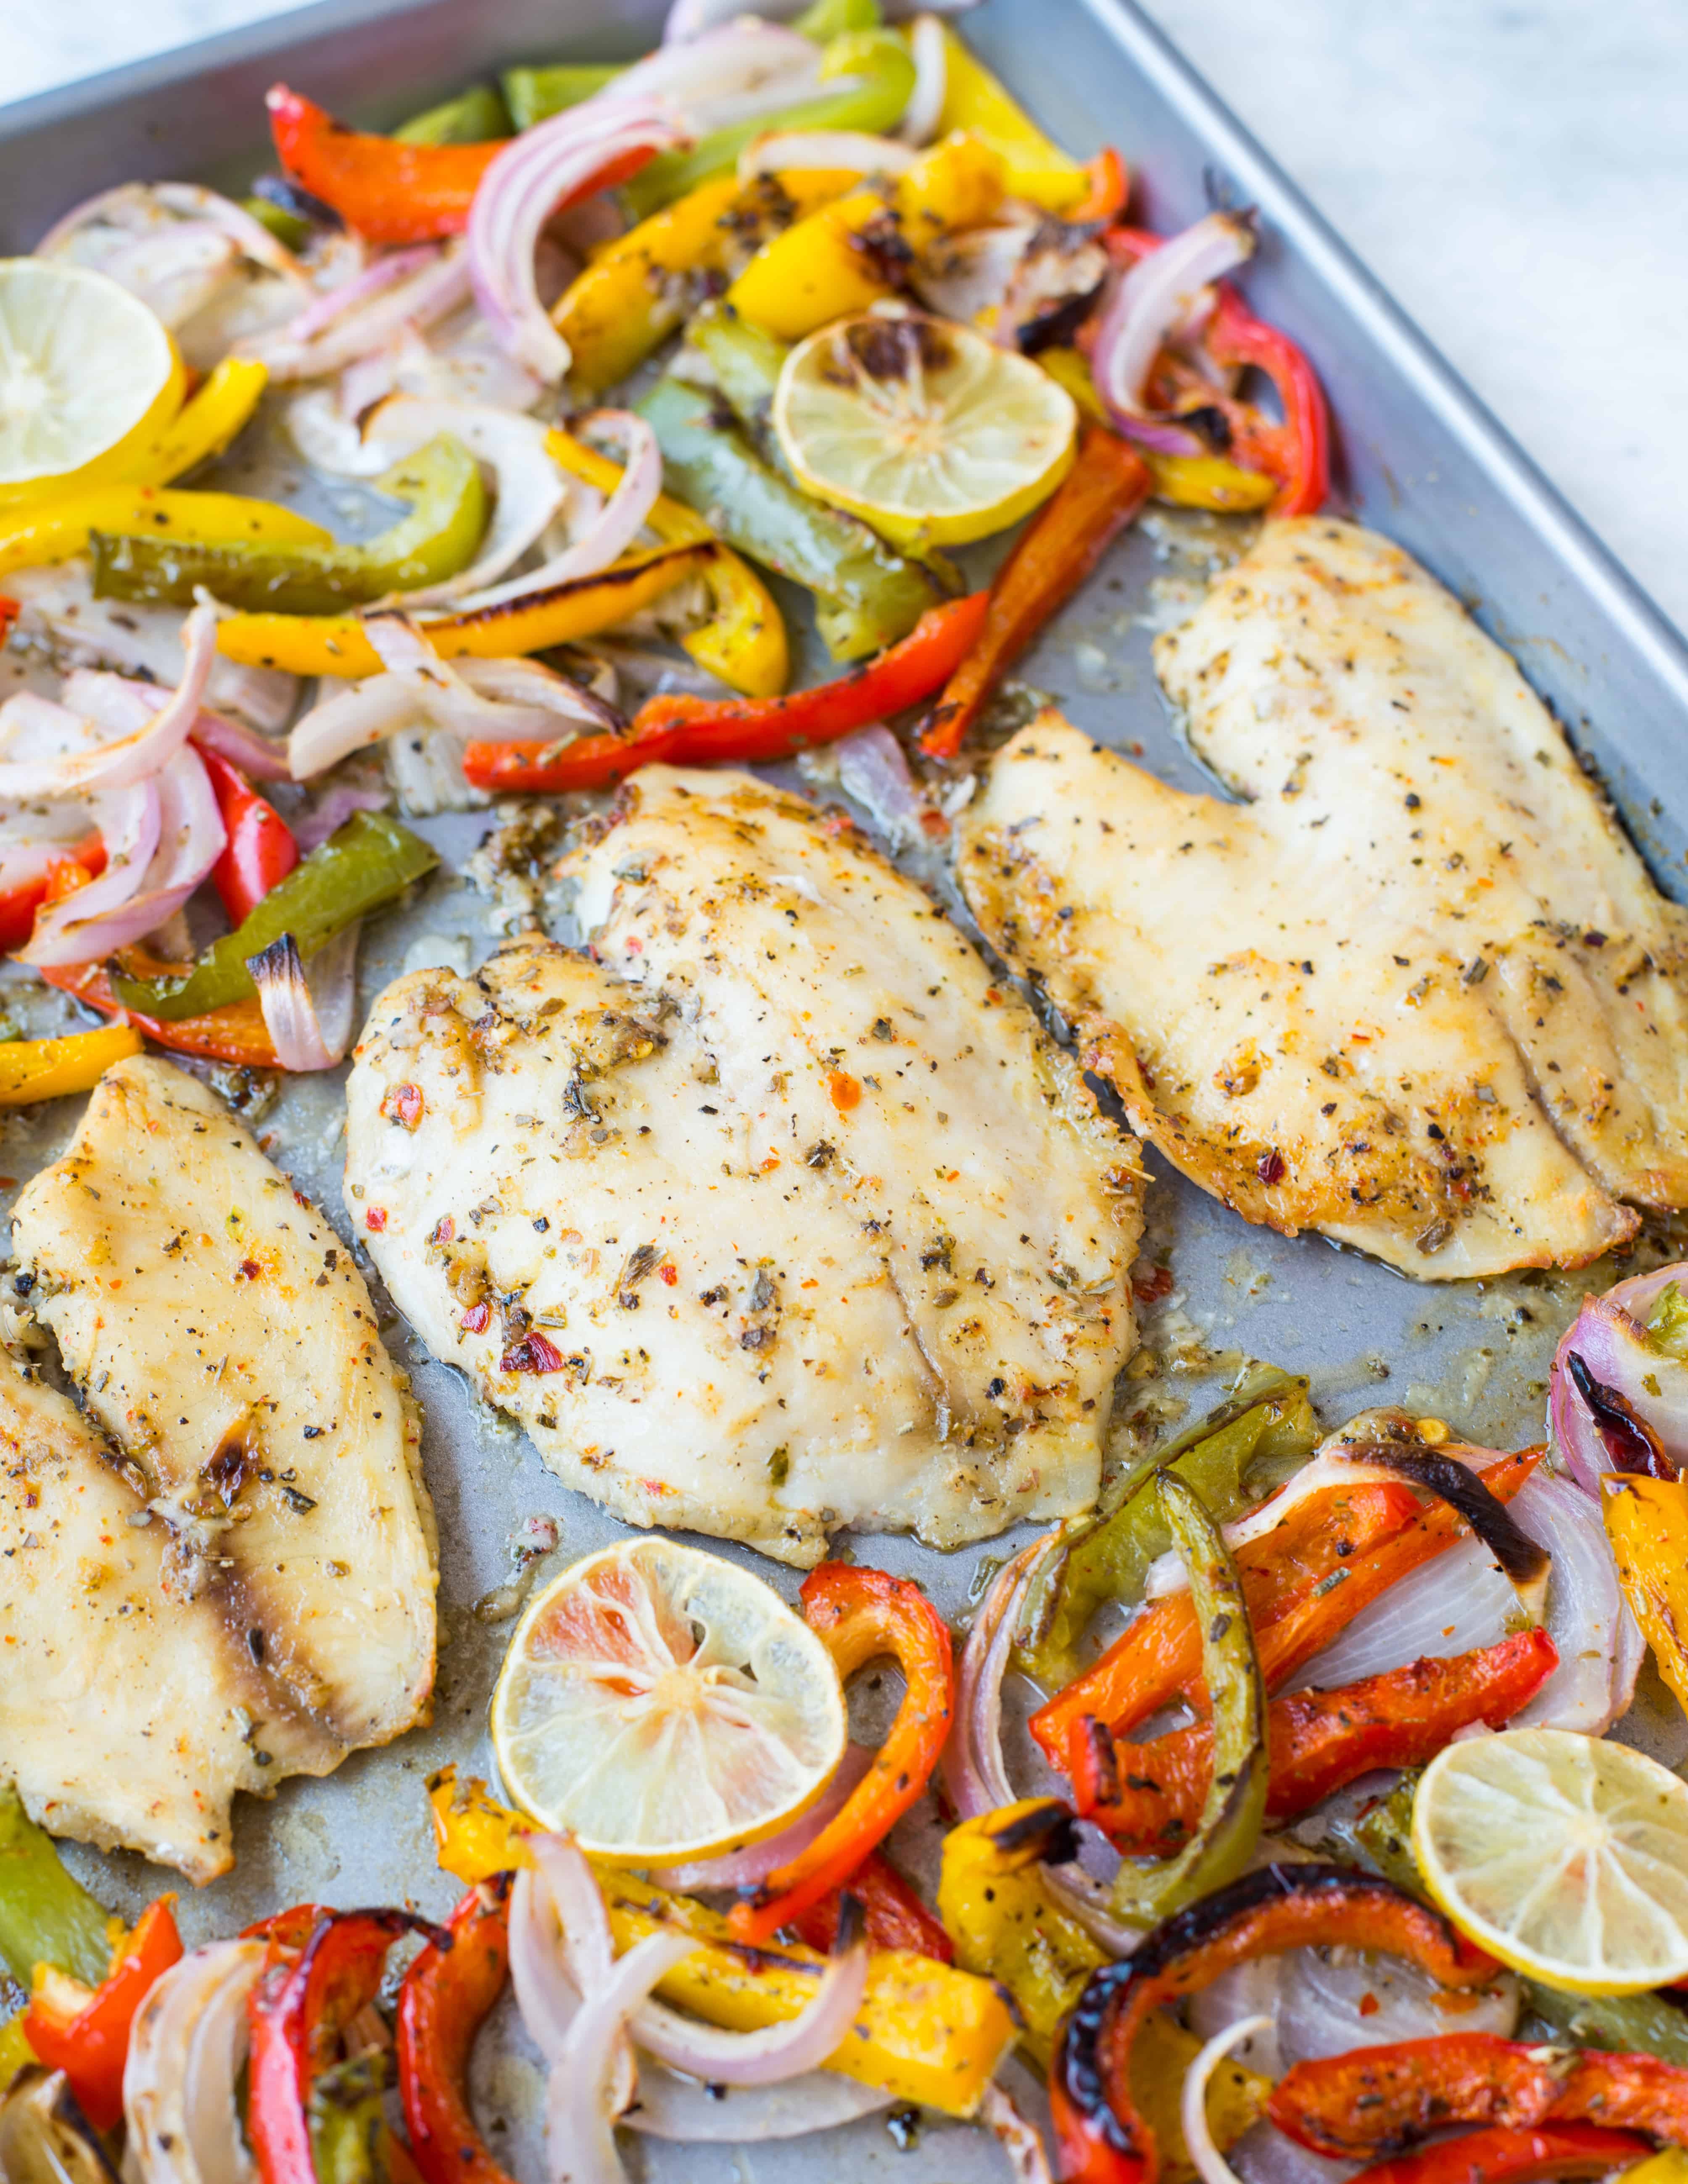 Lemon Garlic Baked Tilapia and Veggies in a delicious lemon garlic butter sauce. This Baked Tilapia recipe is a healthy dinner made in under 20 minutes.